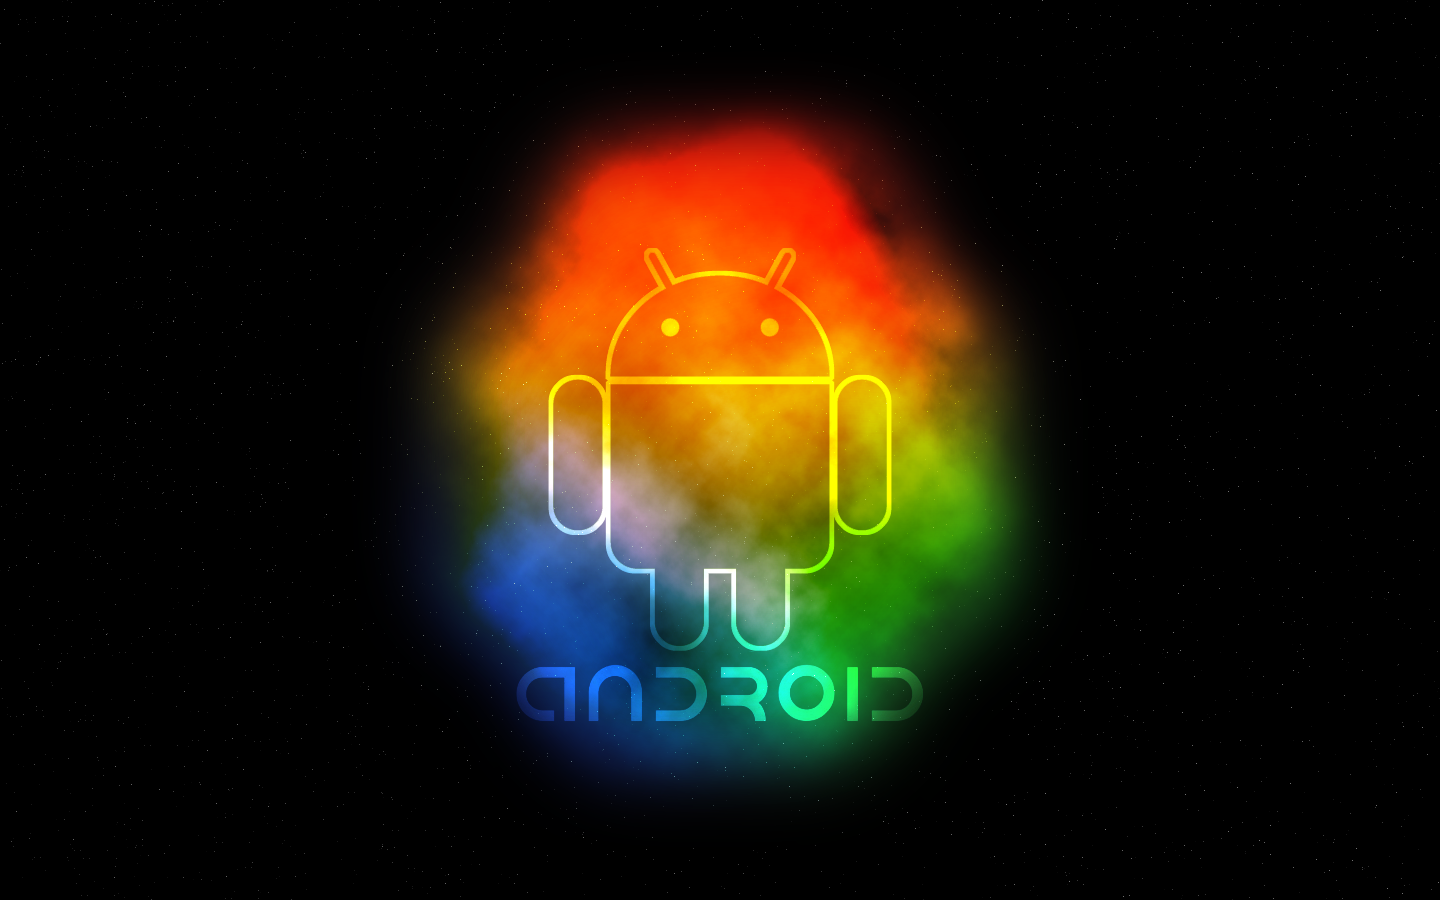 Android Wallpaper By Lucidfusion On Deviantart Android ドロイド君のデスクトップ壁紙集 Naver まとめ